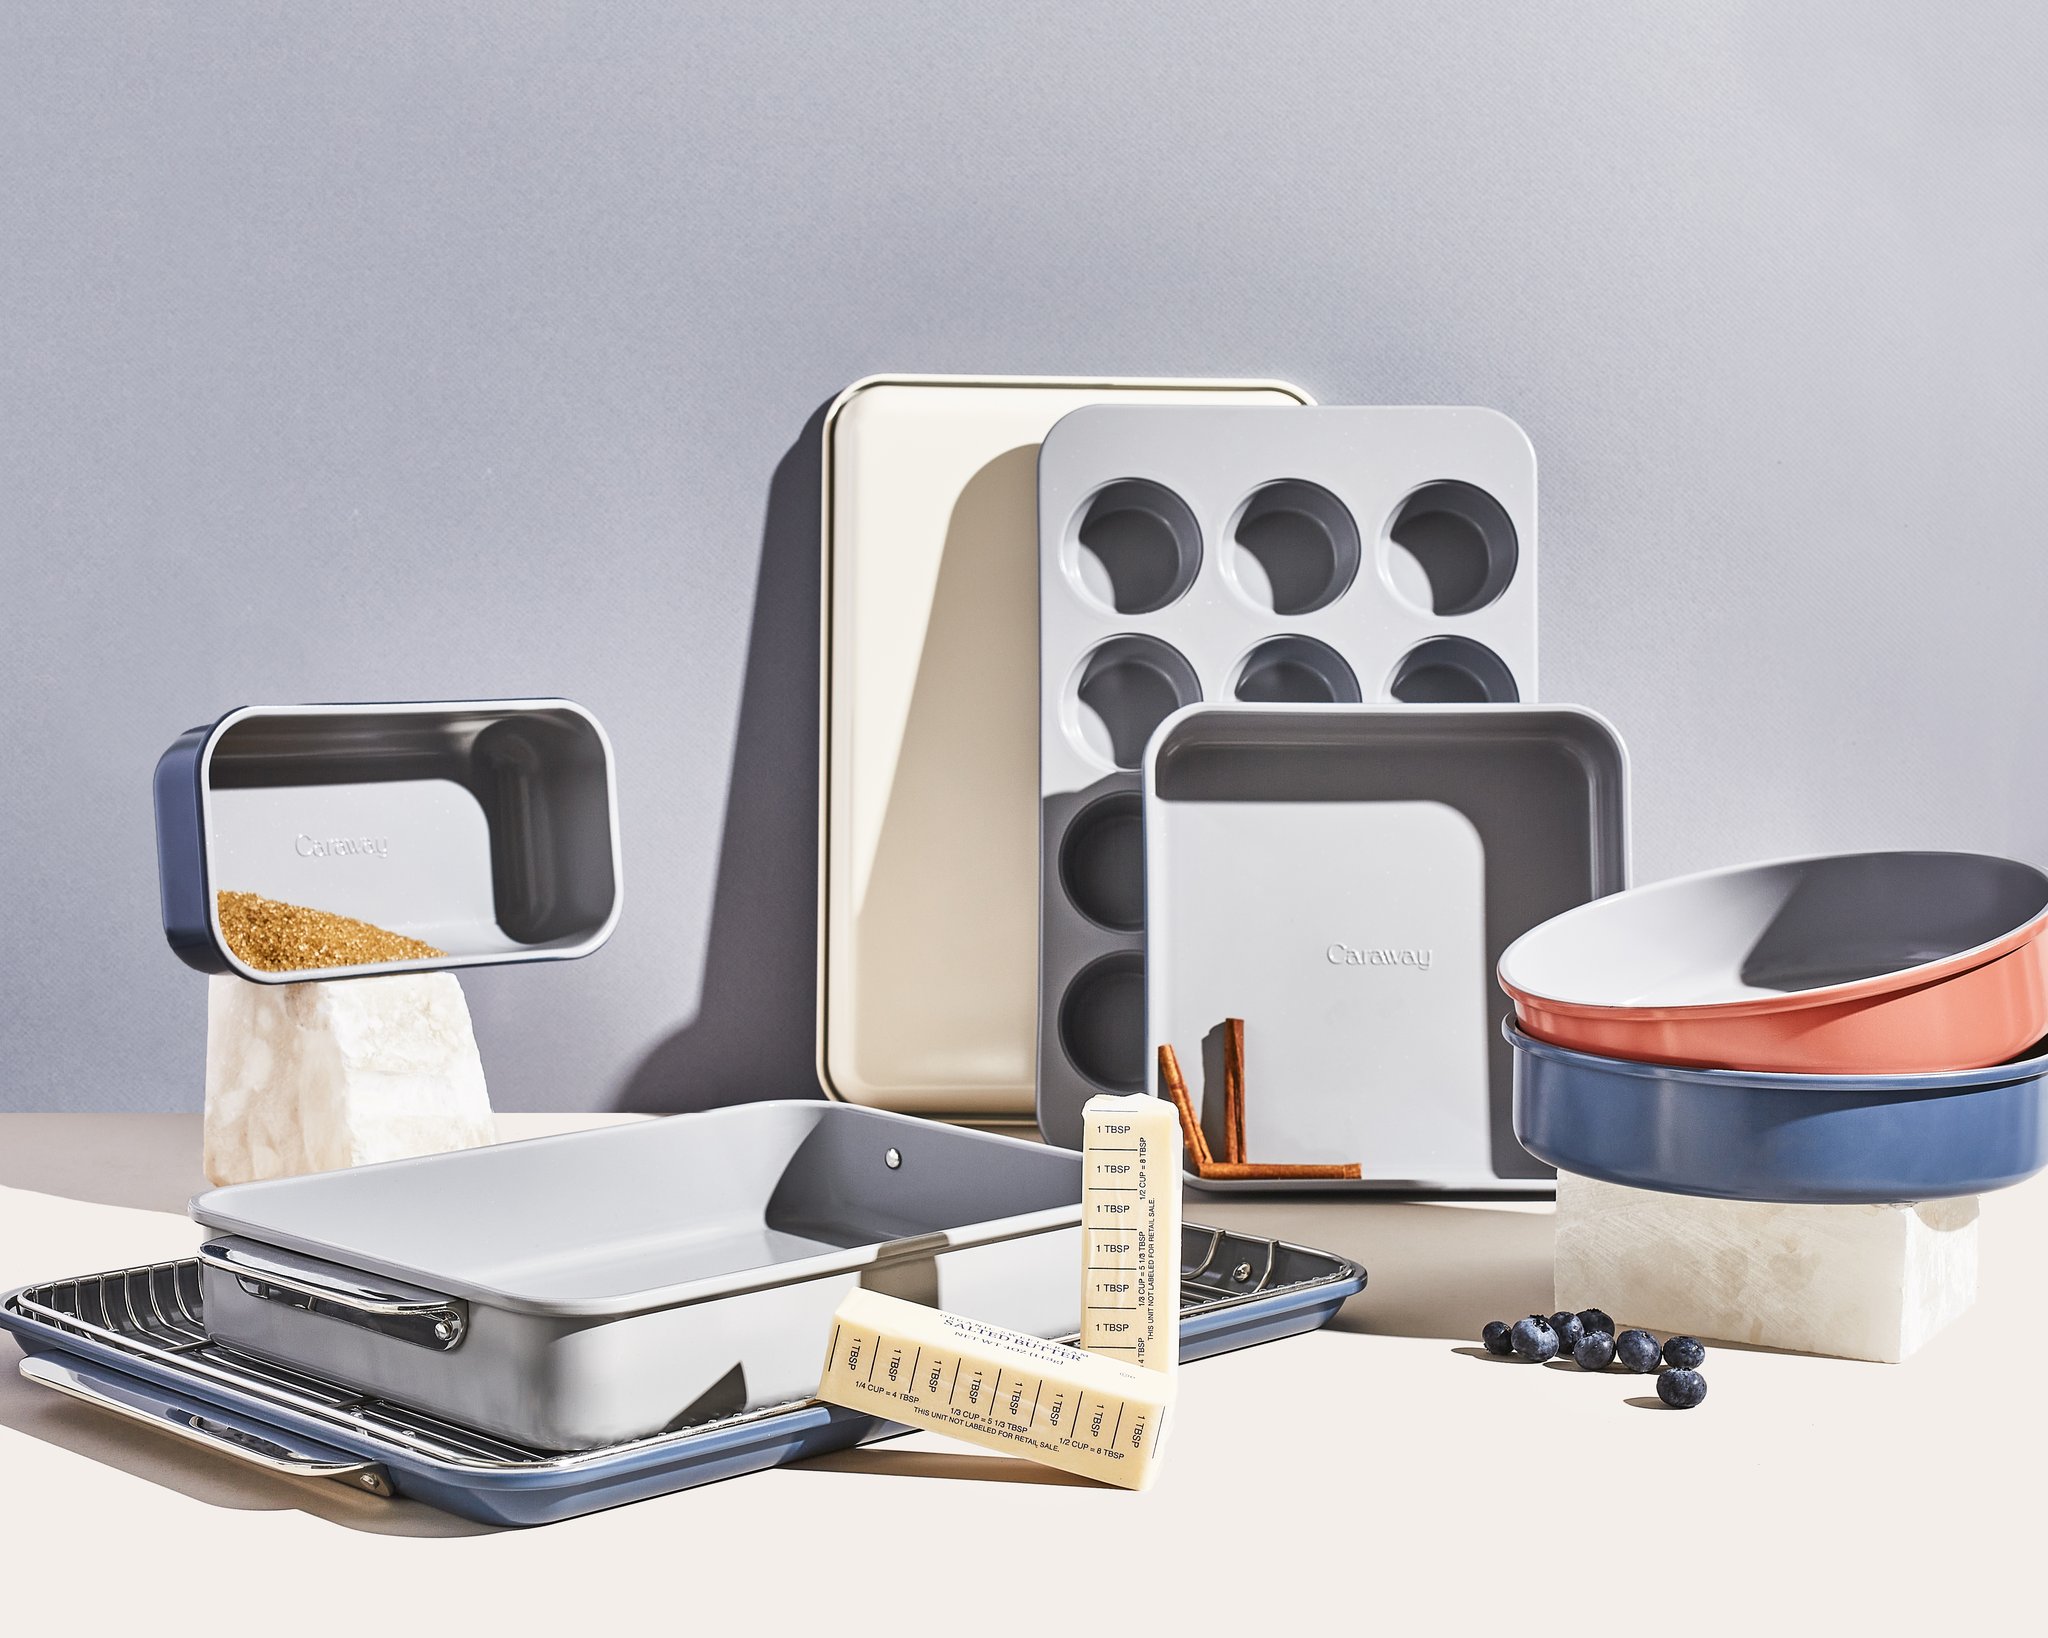 The Caraway Home Bakeware Collection